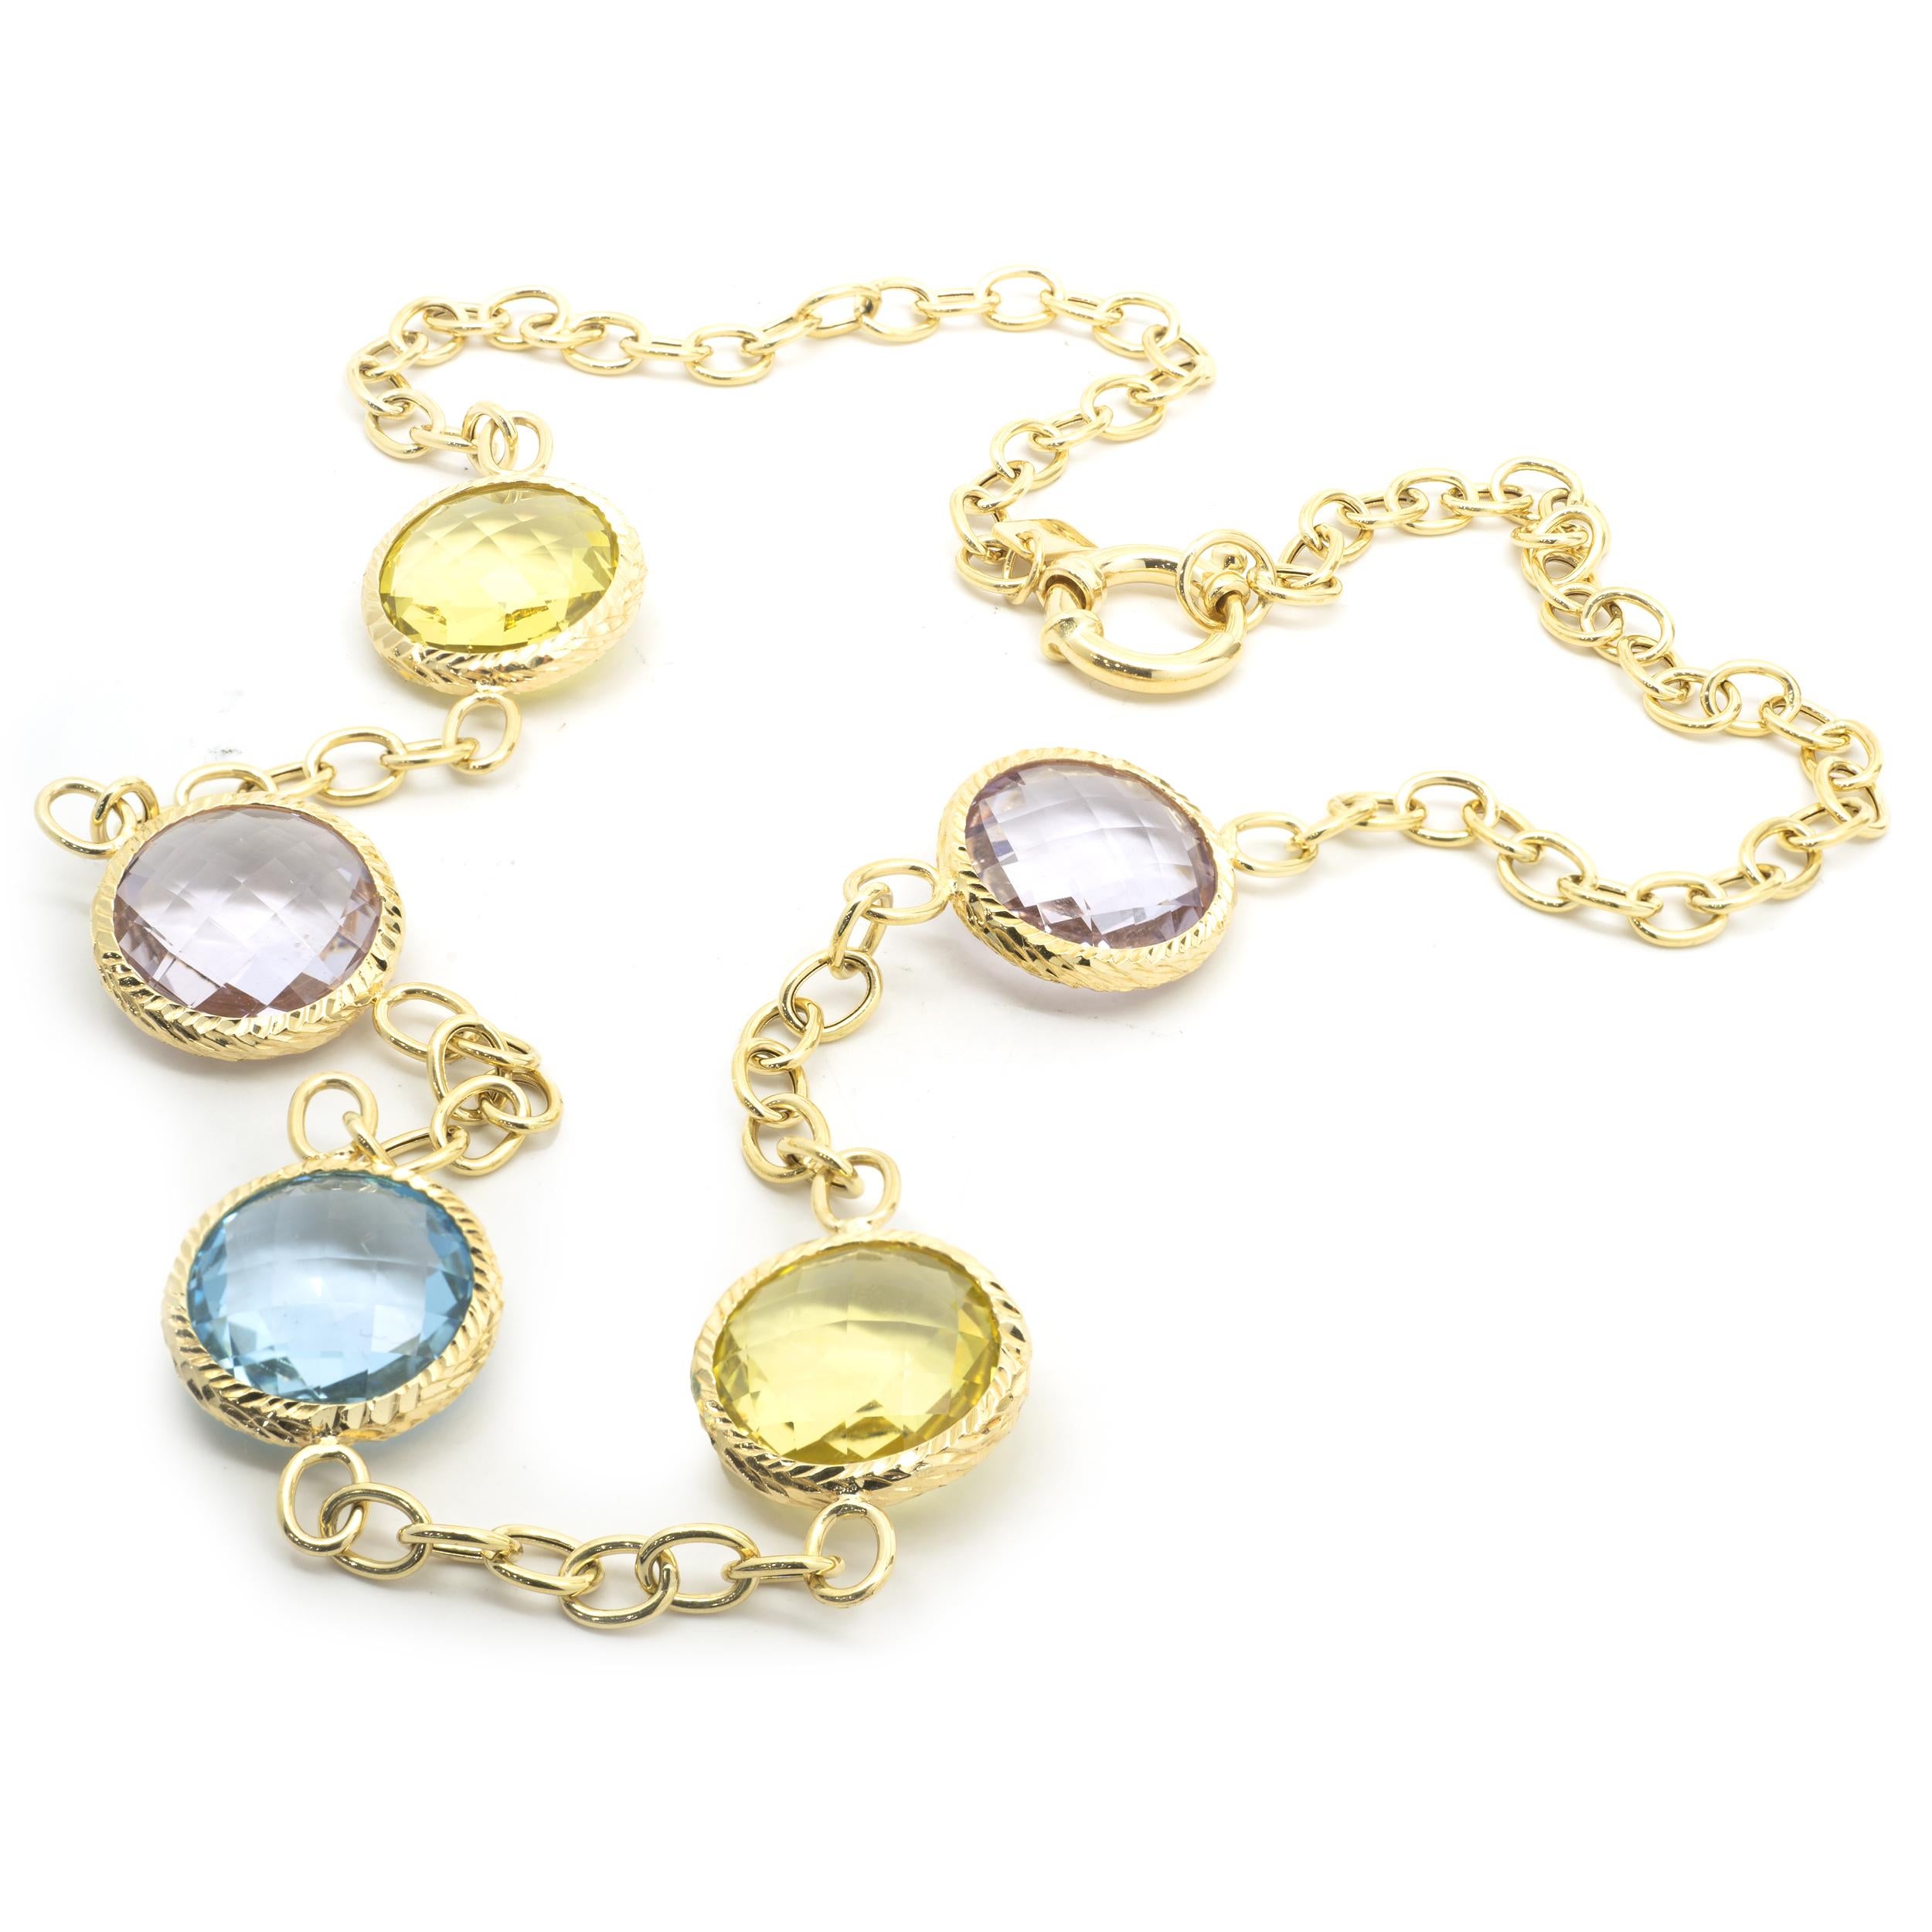 Designer: custom 
Material: 18K yellow gold
Dimensions: necklace measures 20-inches long
Weight: 27.86 grams
